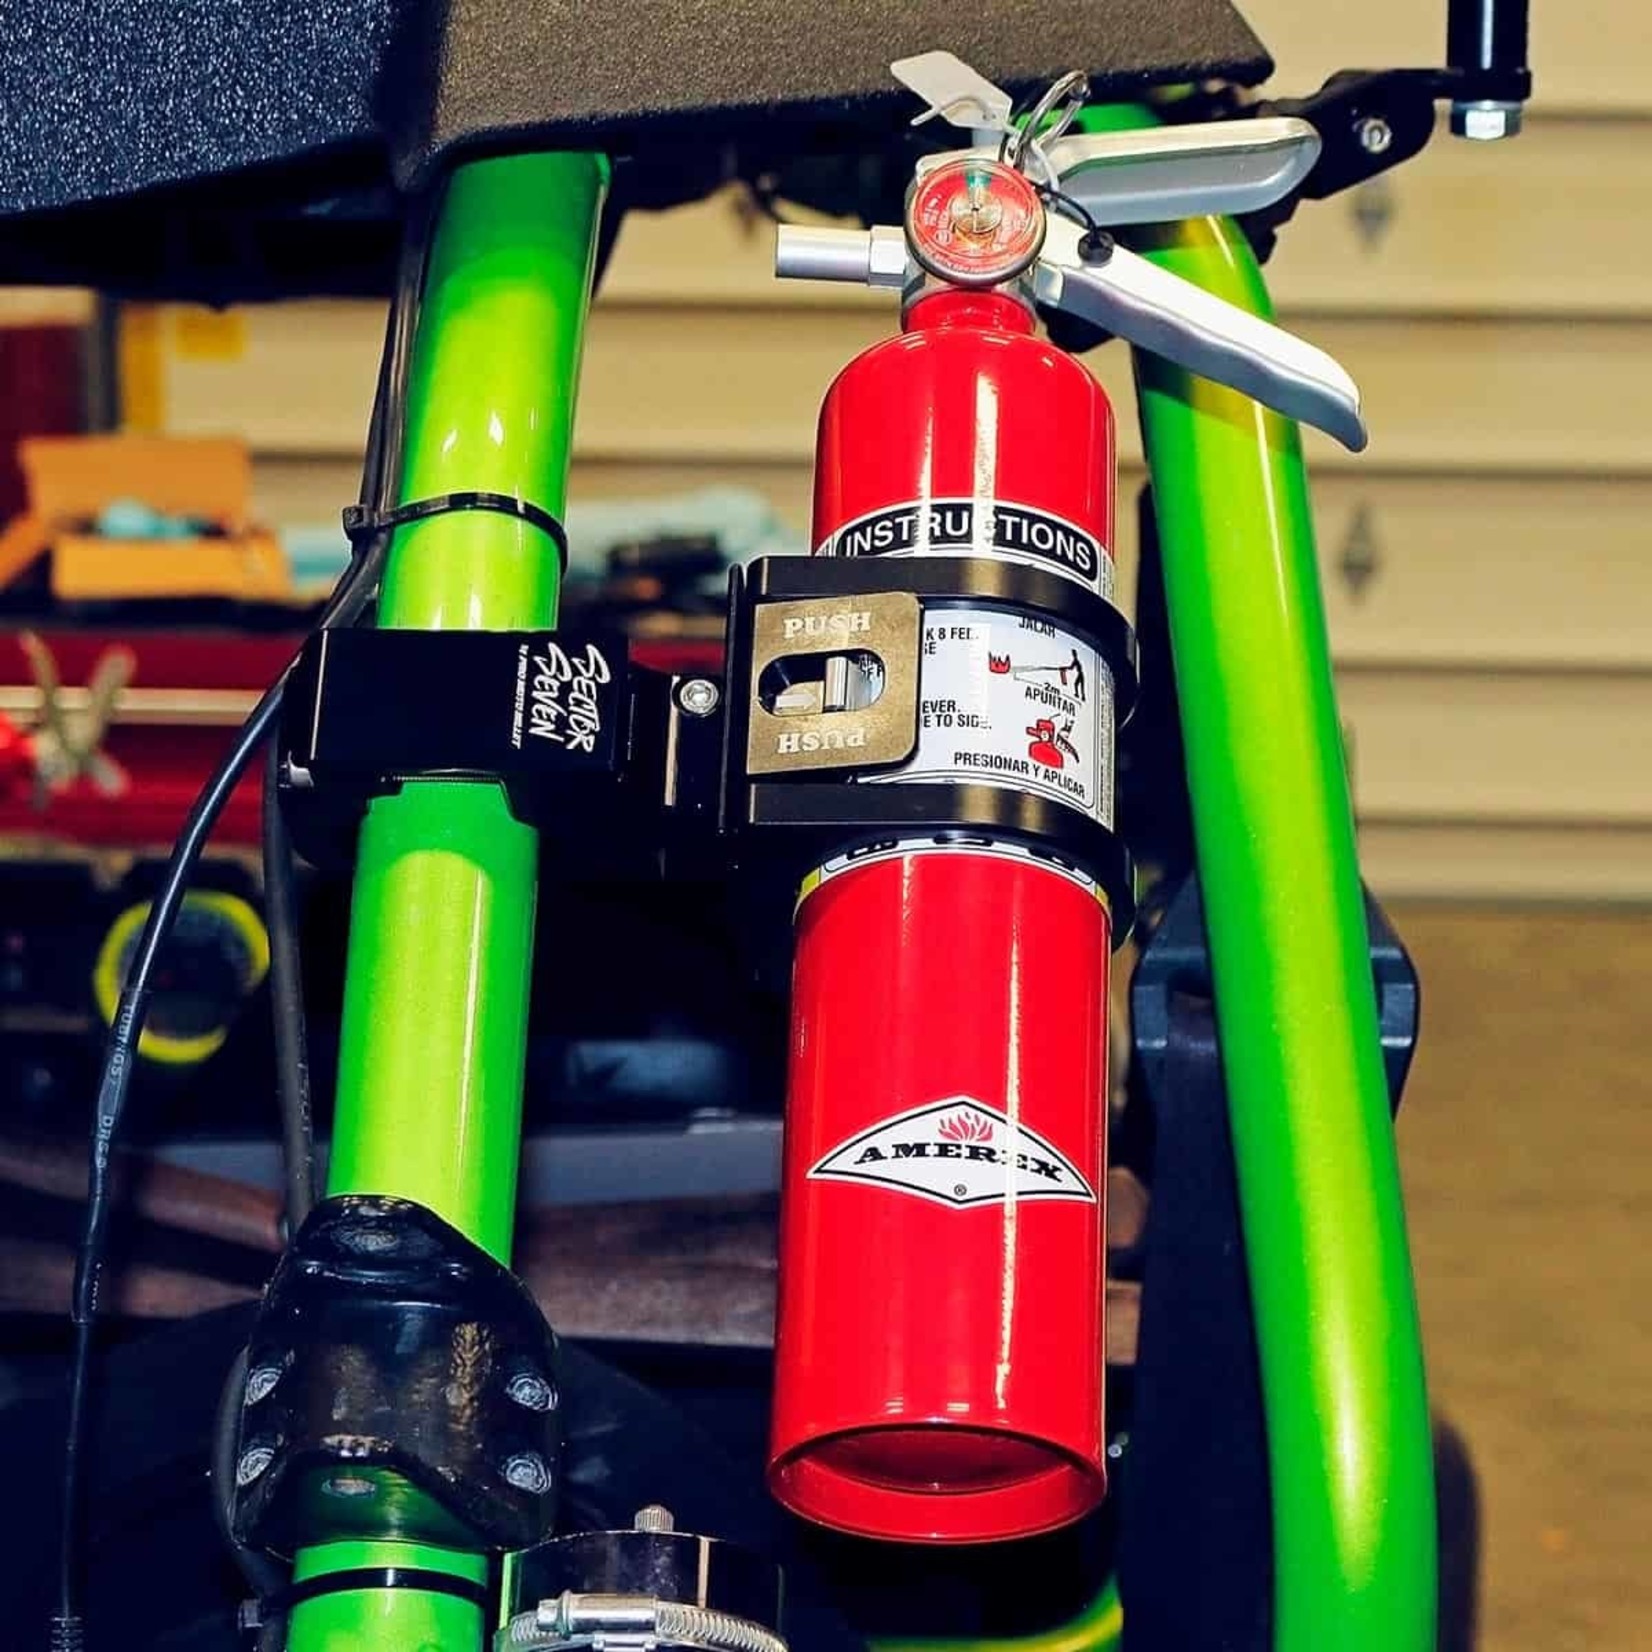 Sector Seven Fire Extinguisher with Sector Seven Quick Release Mount